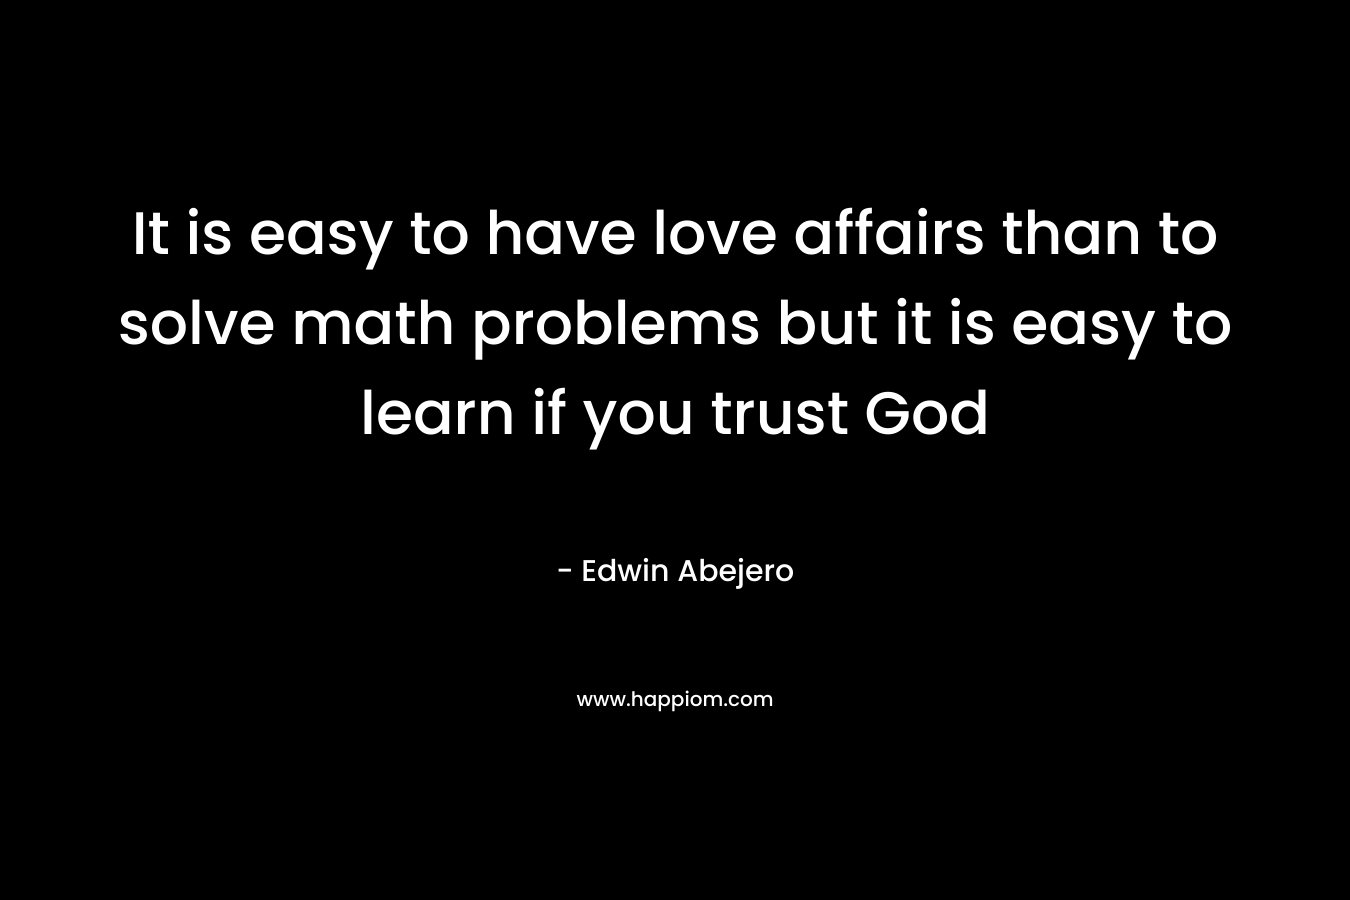 It is easy to have love affairs than to solve math problems but it is easy to learn if you trust God – Edwin Abejero